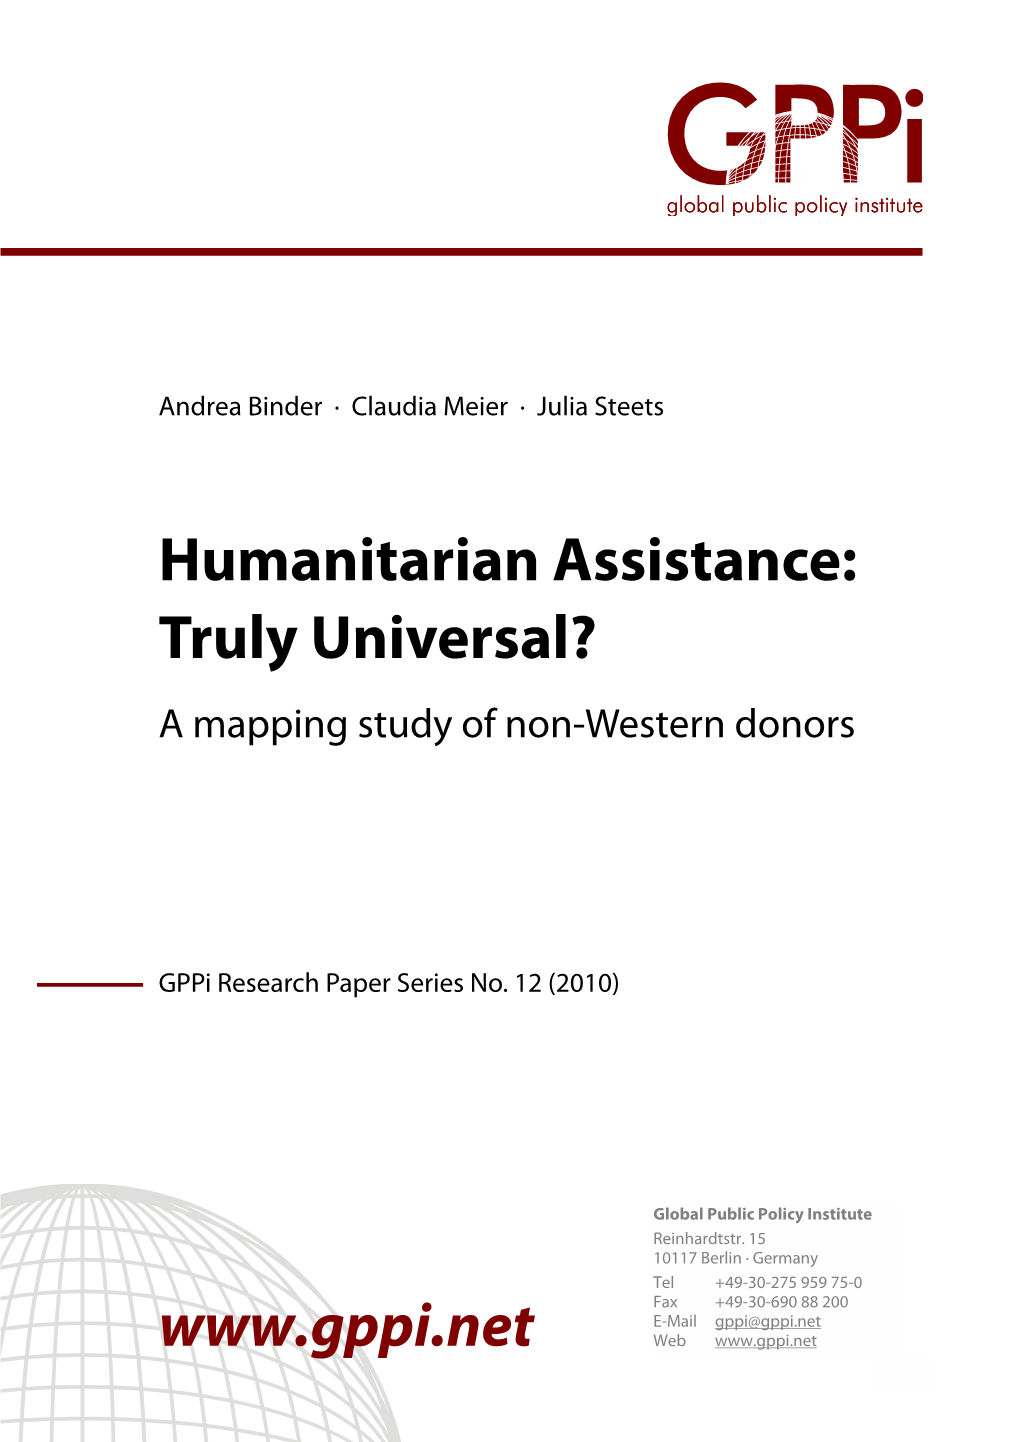 Humanitarian Assistance: Truly Universal? a Mapping Study of Non-Western Donors